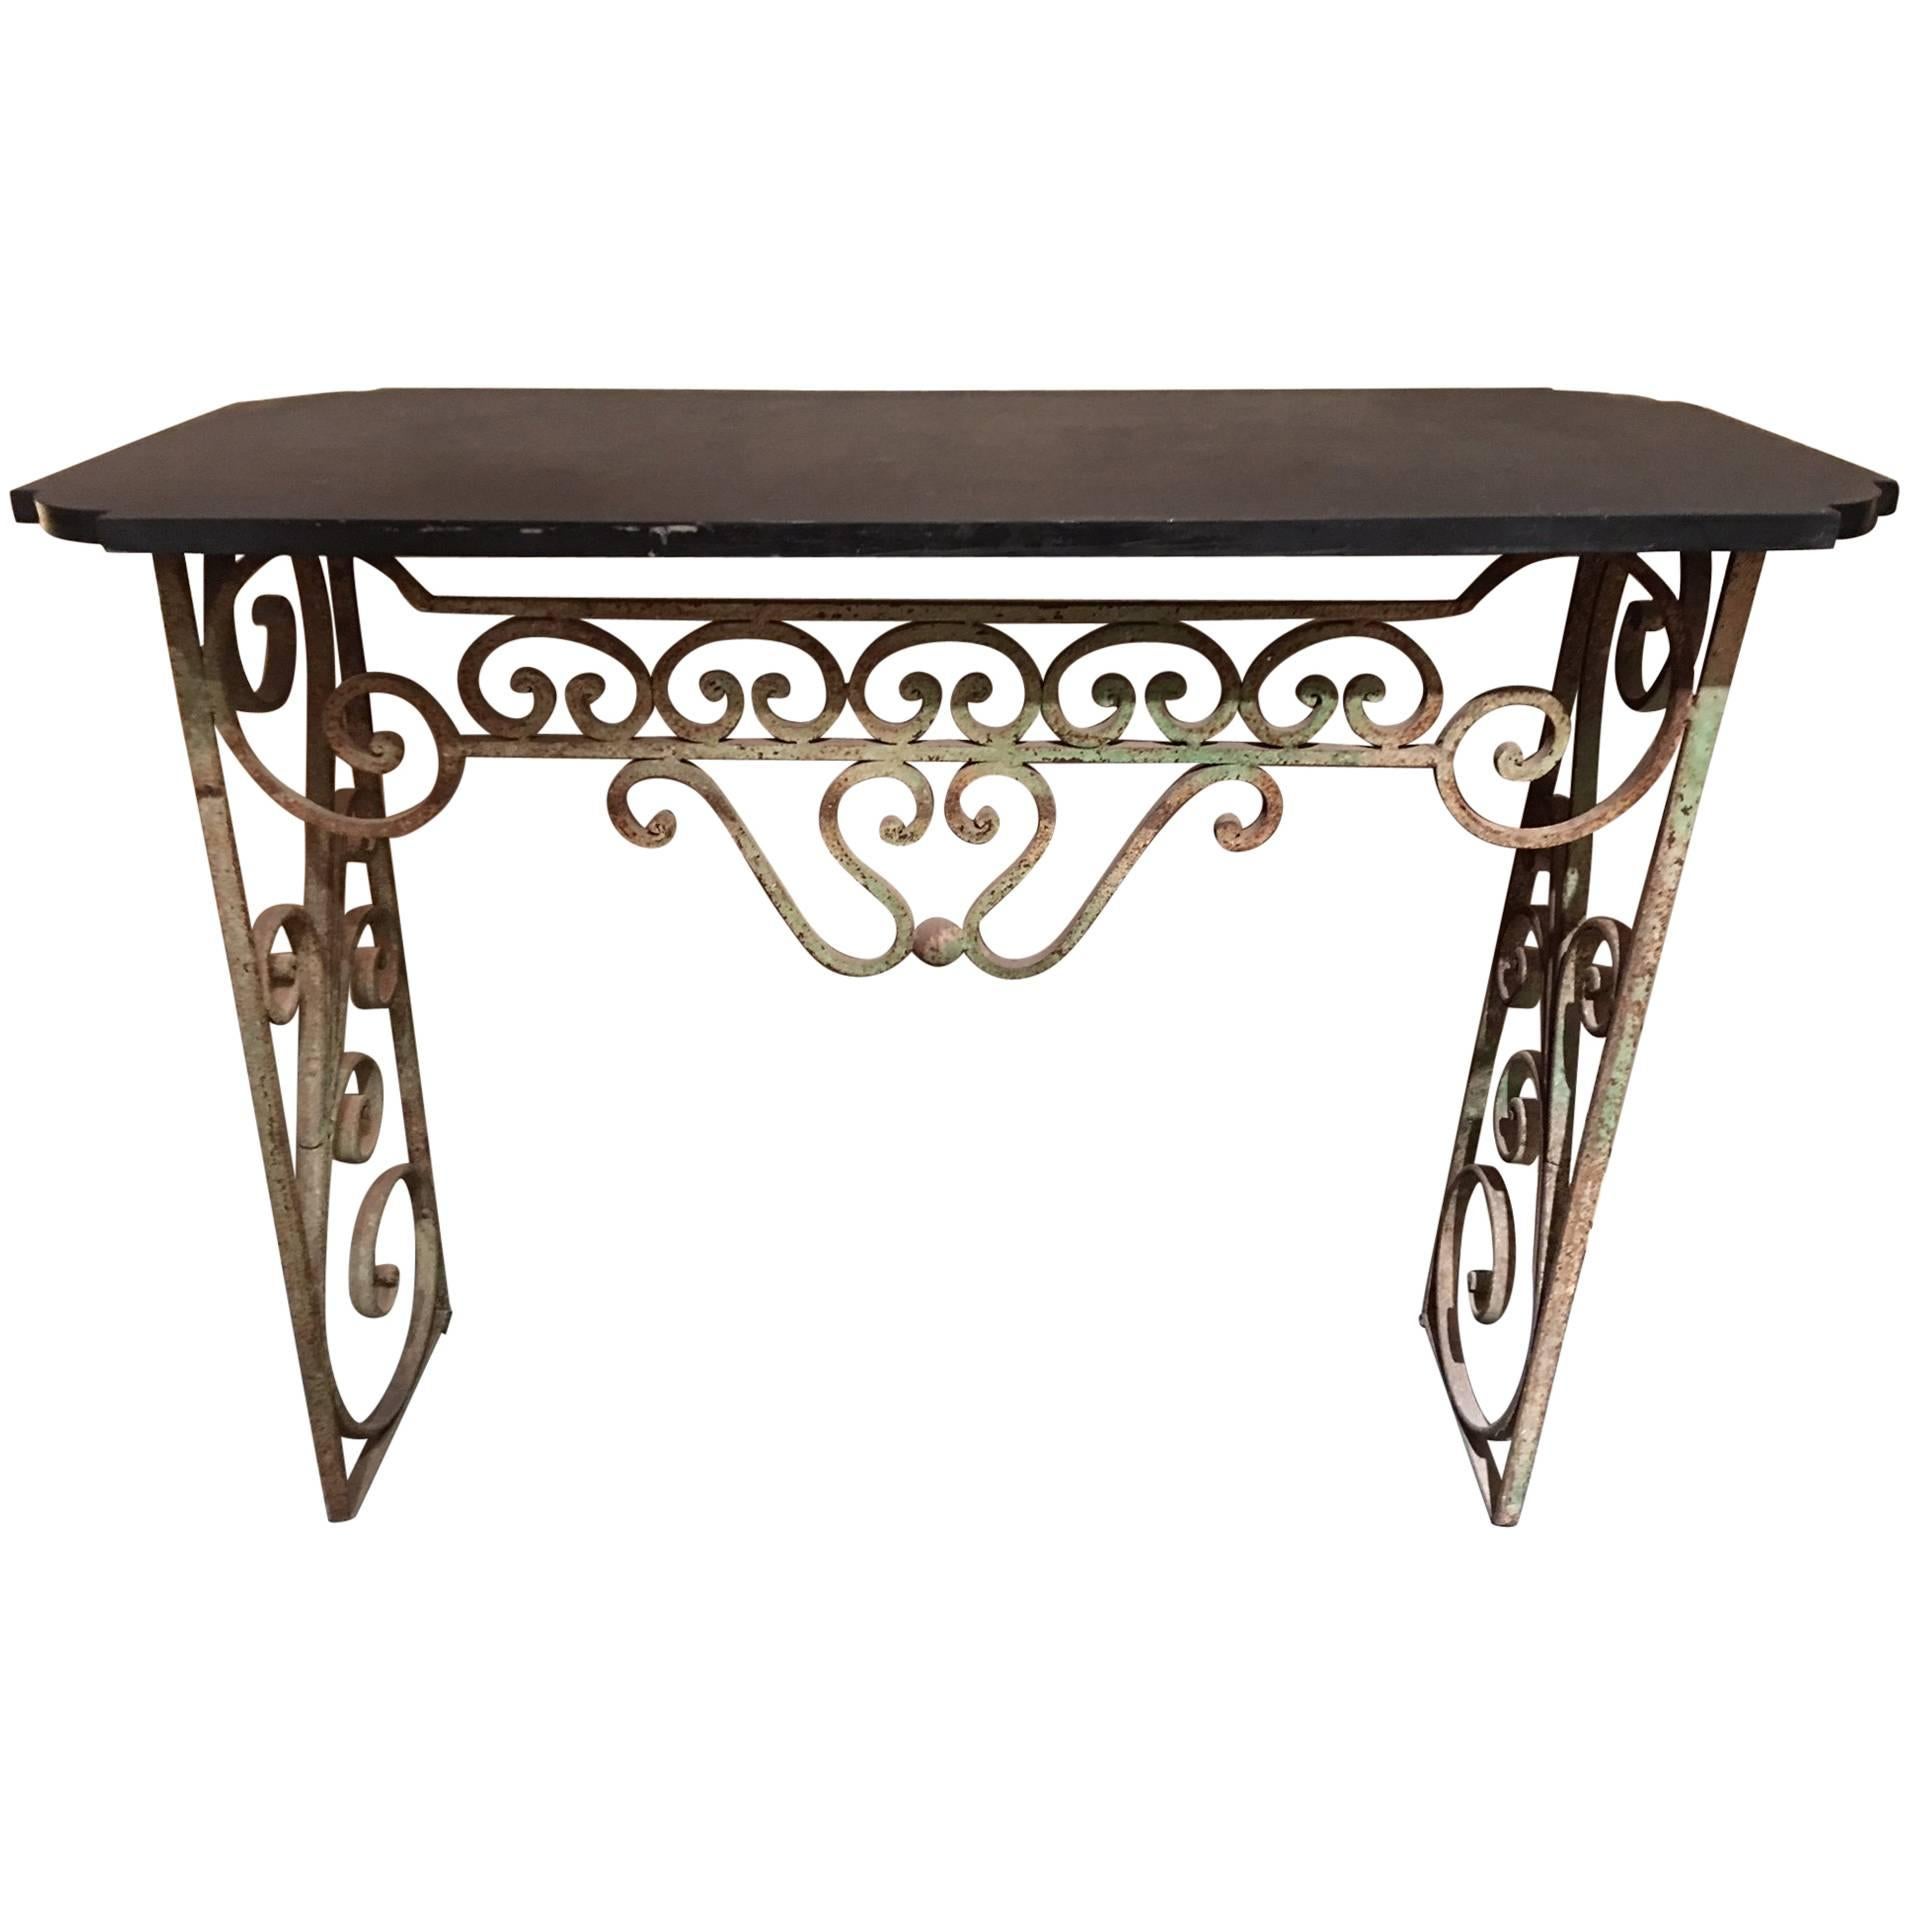 French Wrought Iron Console with a Black Marble Top, Early 20th Century